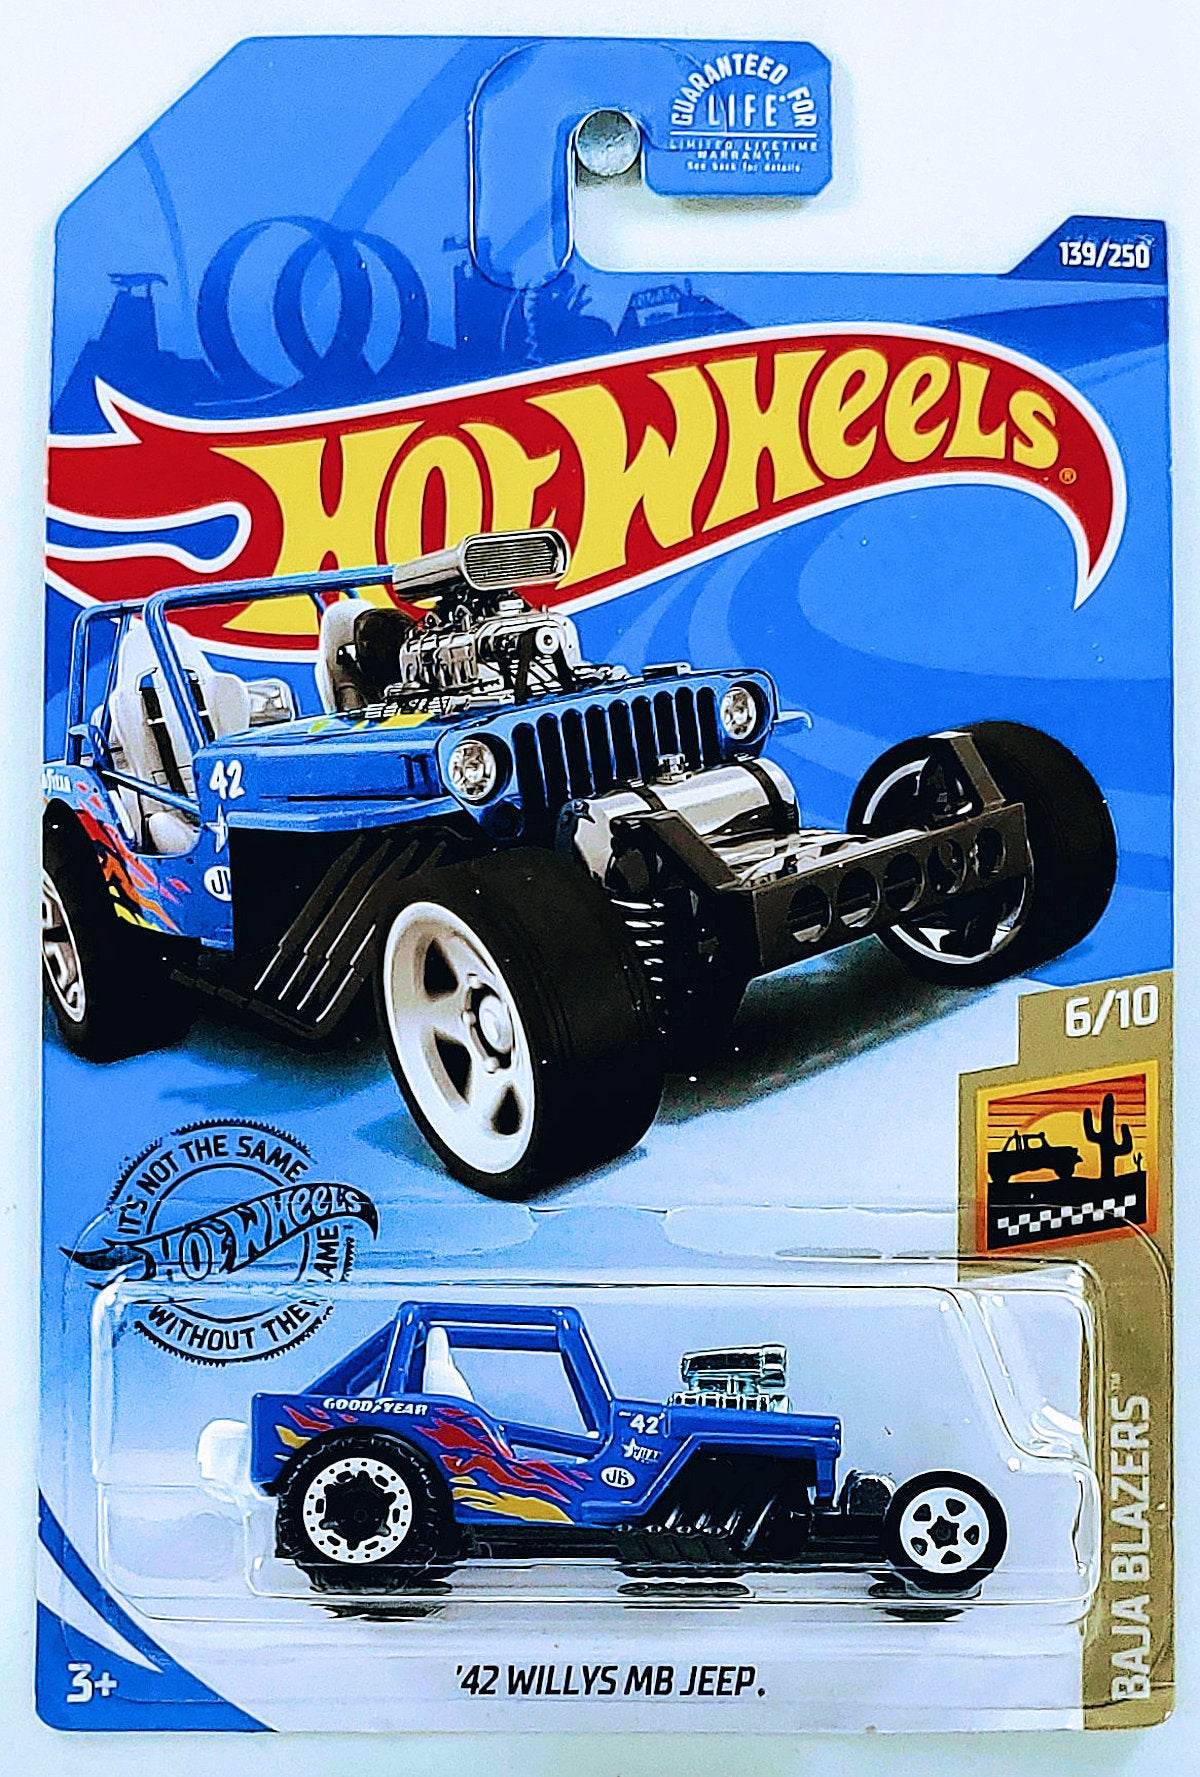 Hot Wheels 2020 - Collector # 139/250 - Baja Blazers 6/10 - '42 Willys MB Jeep - Blue